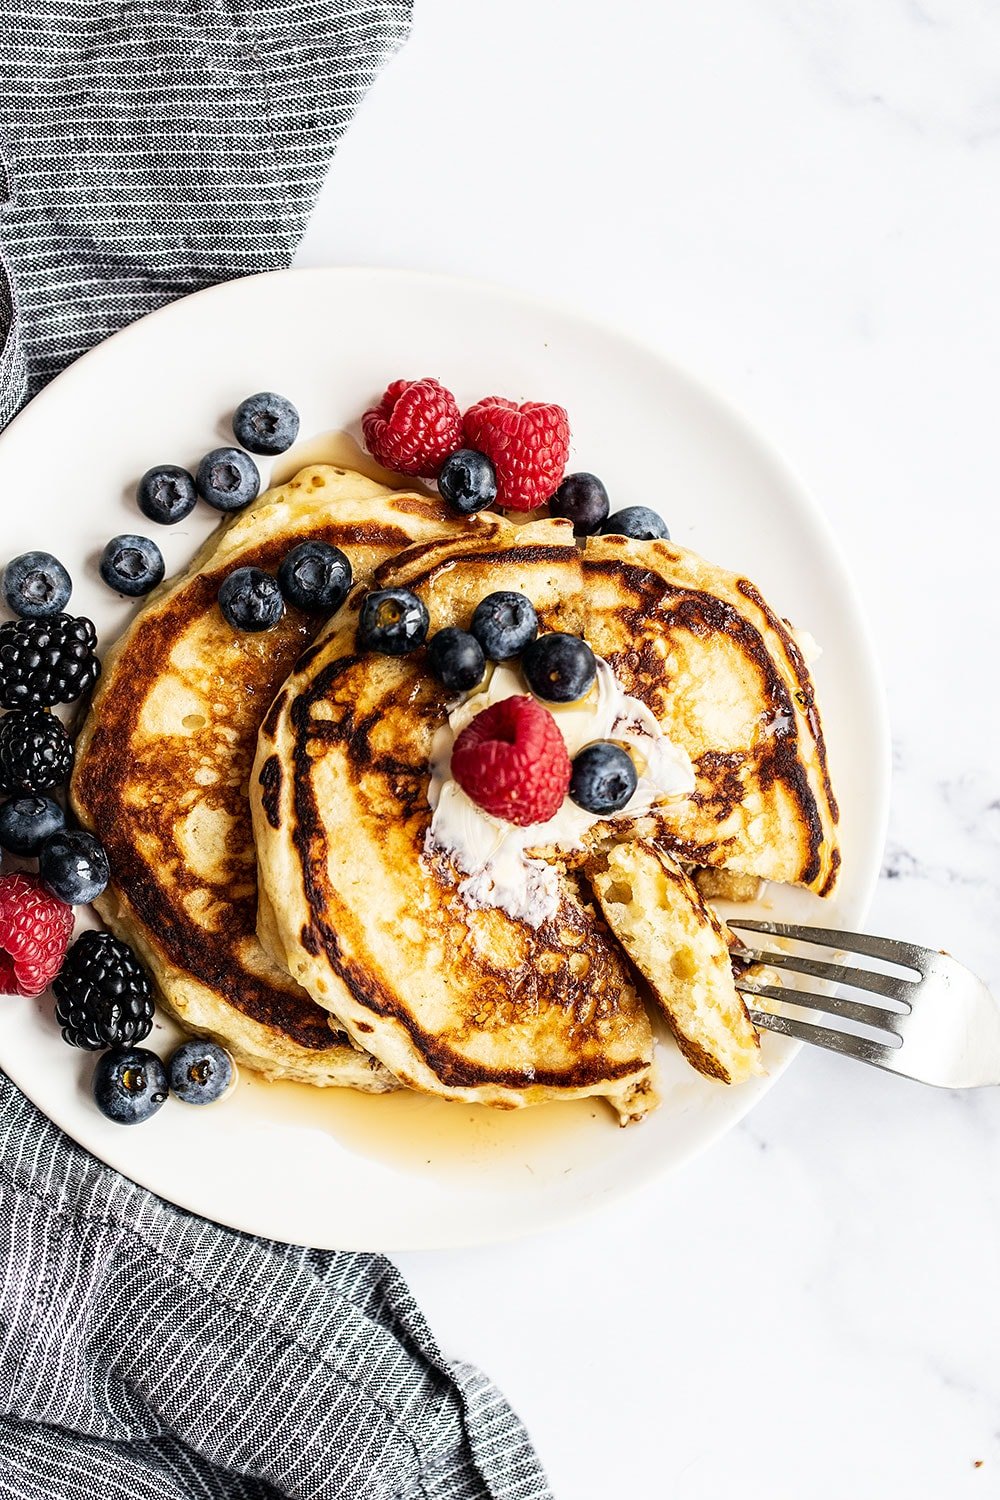 Overhead look of pancakes with golden brown cripsy edges